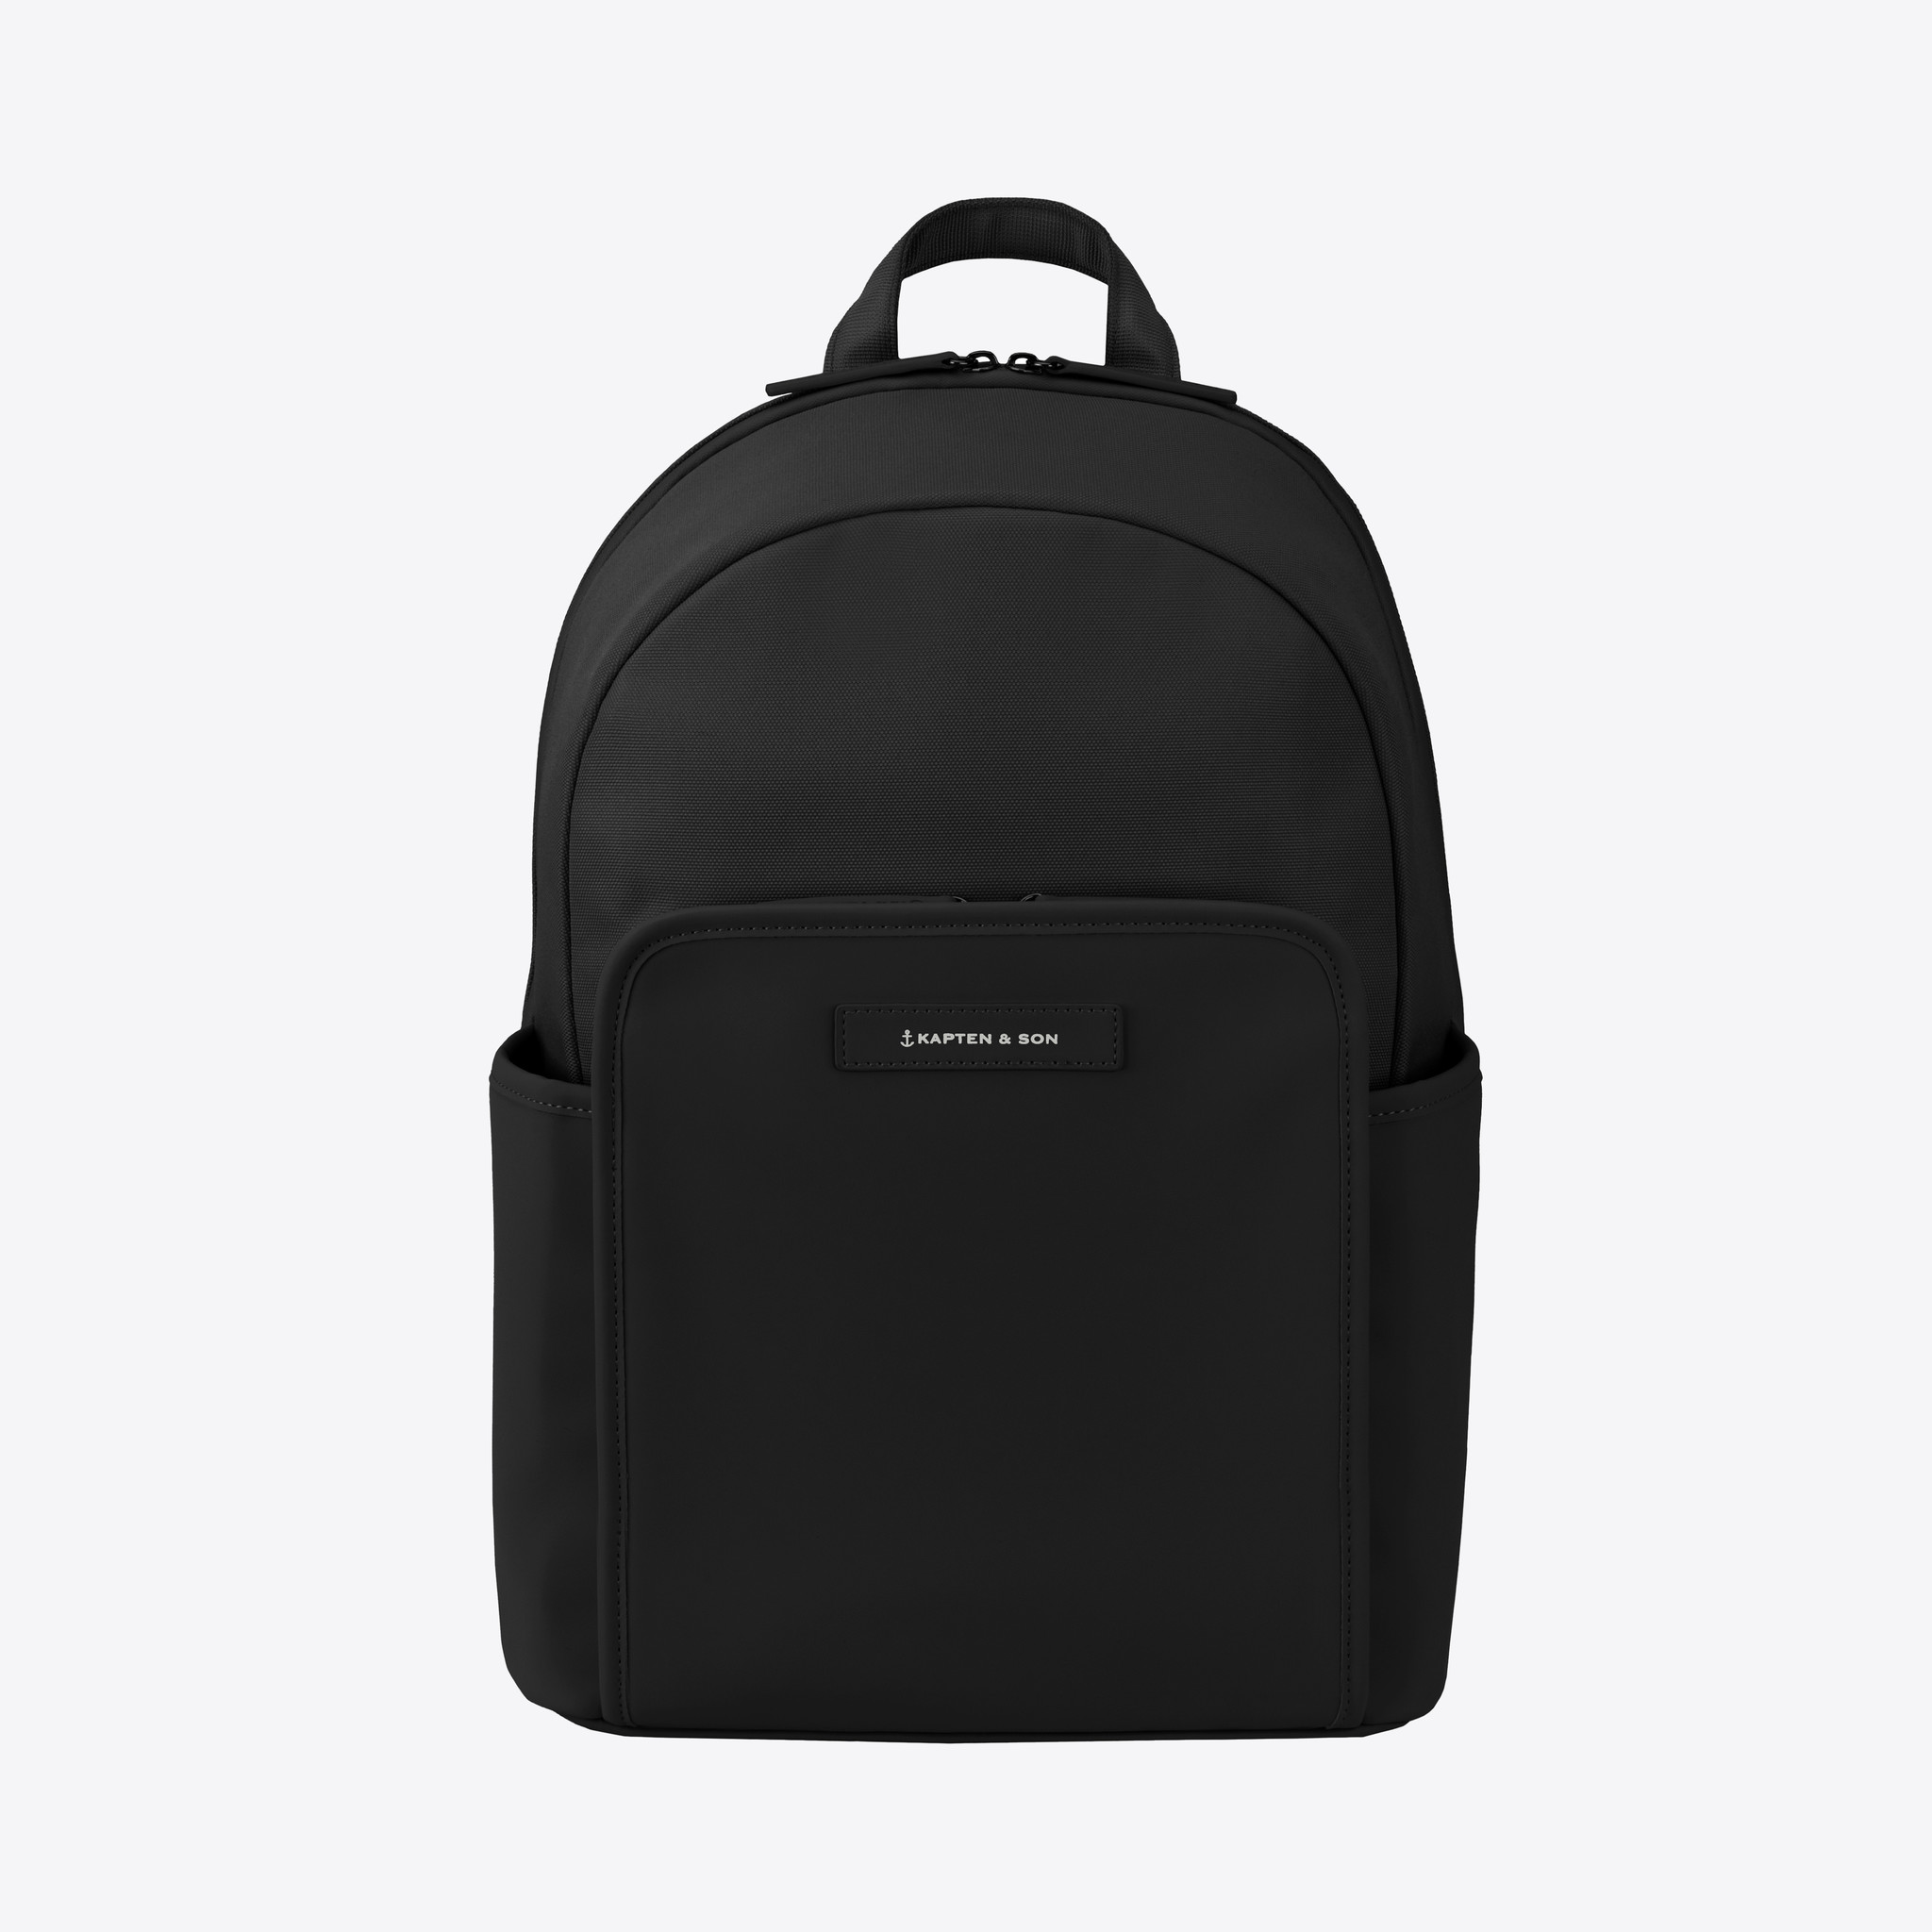 Kapten and Son Aalborg All Black Backpack - FREE 24h delivery ...